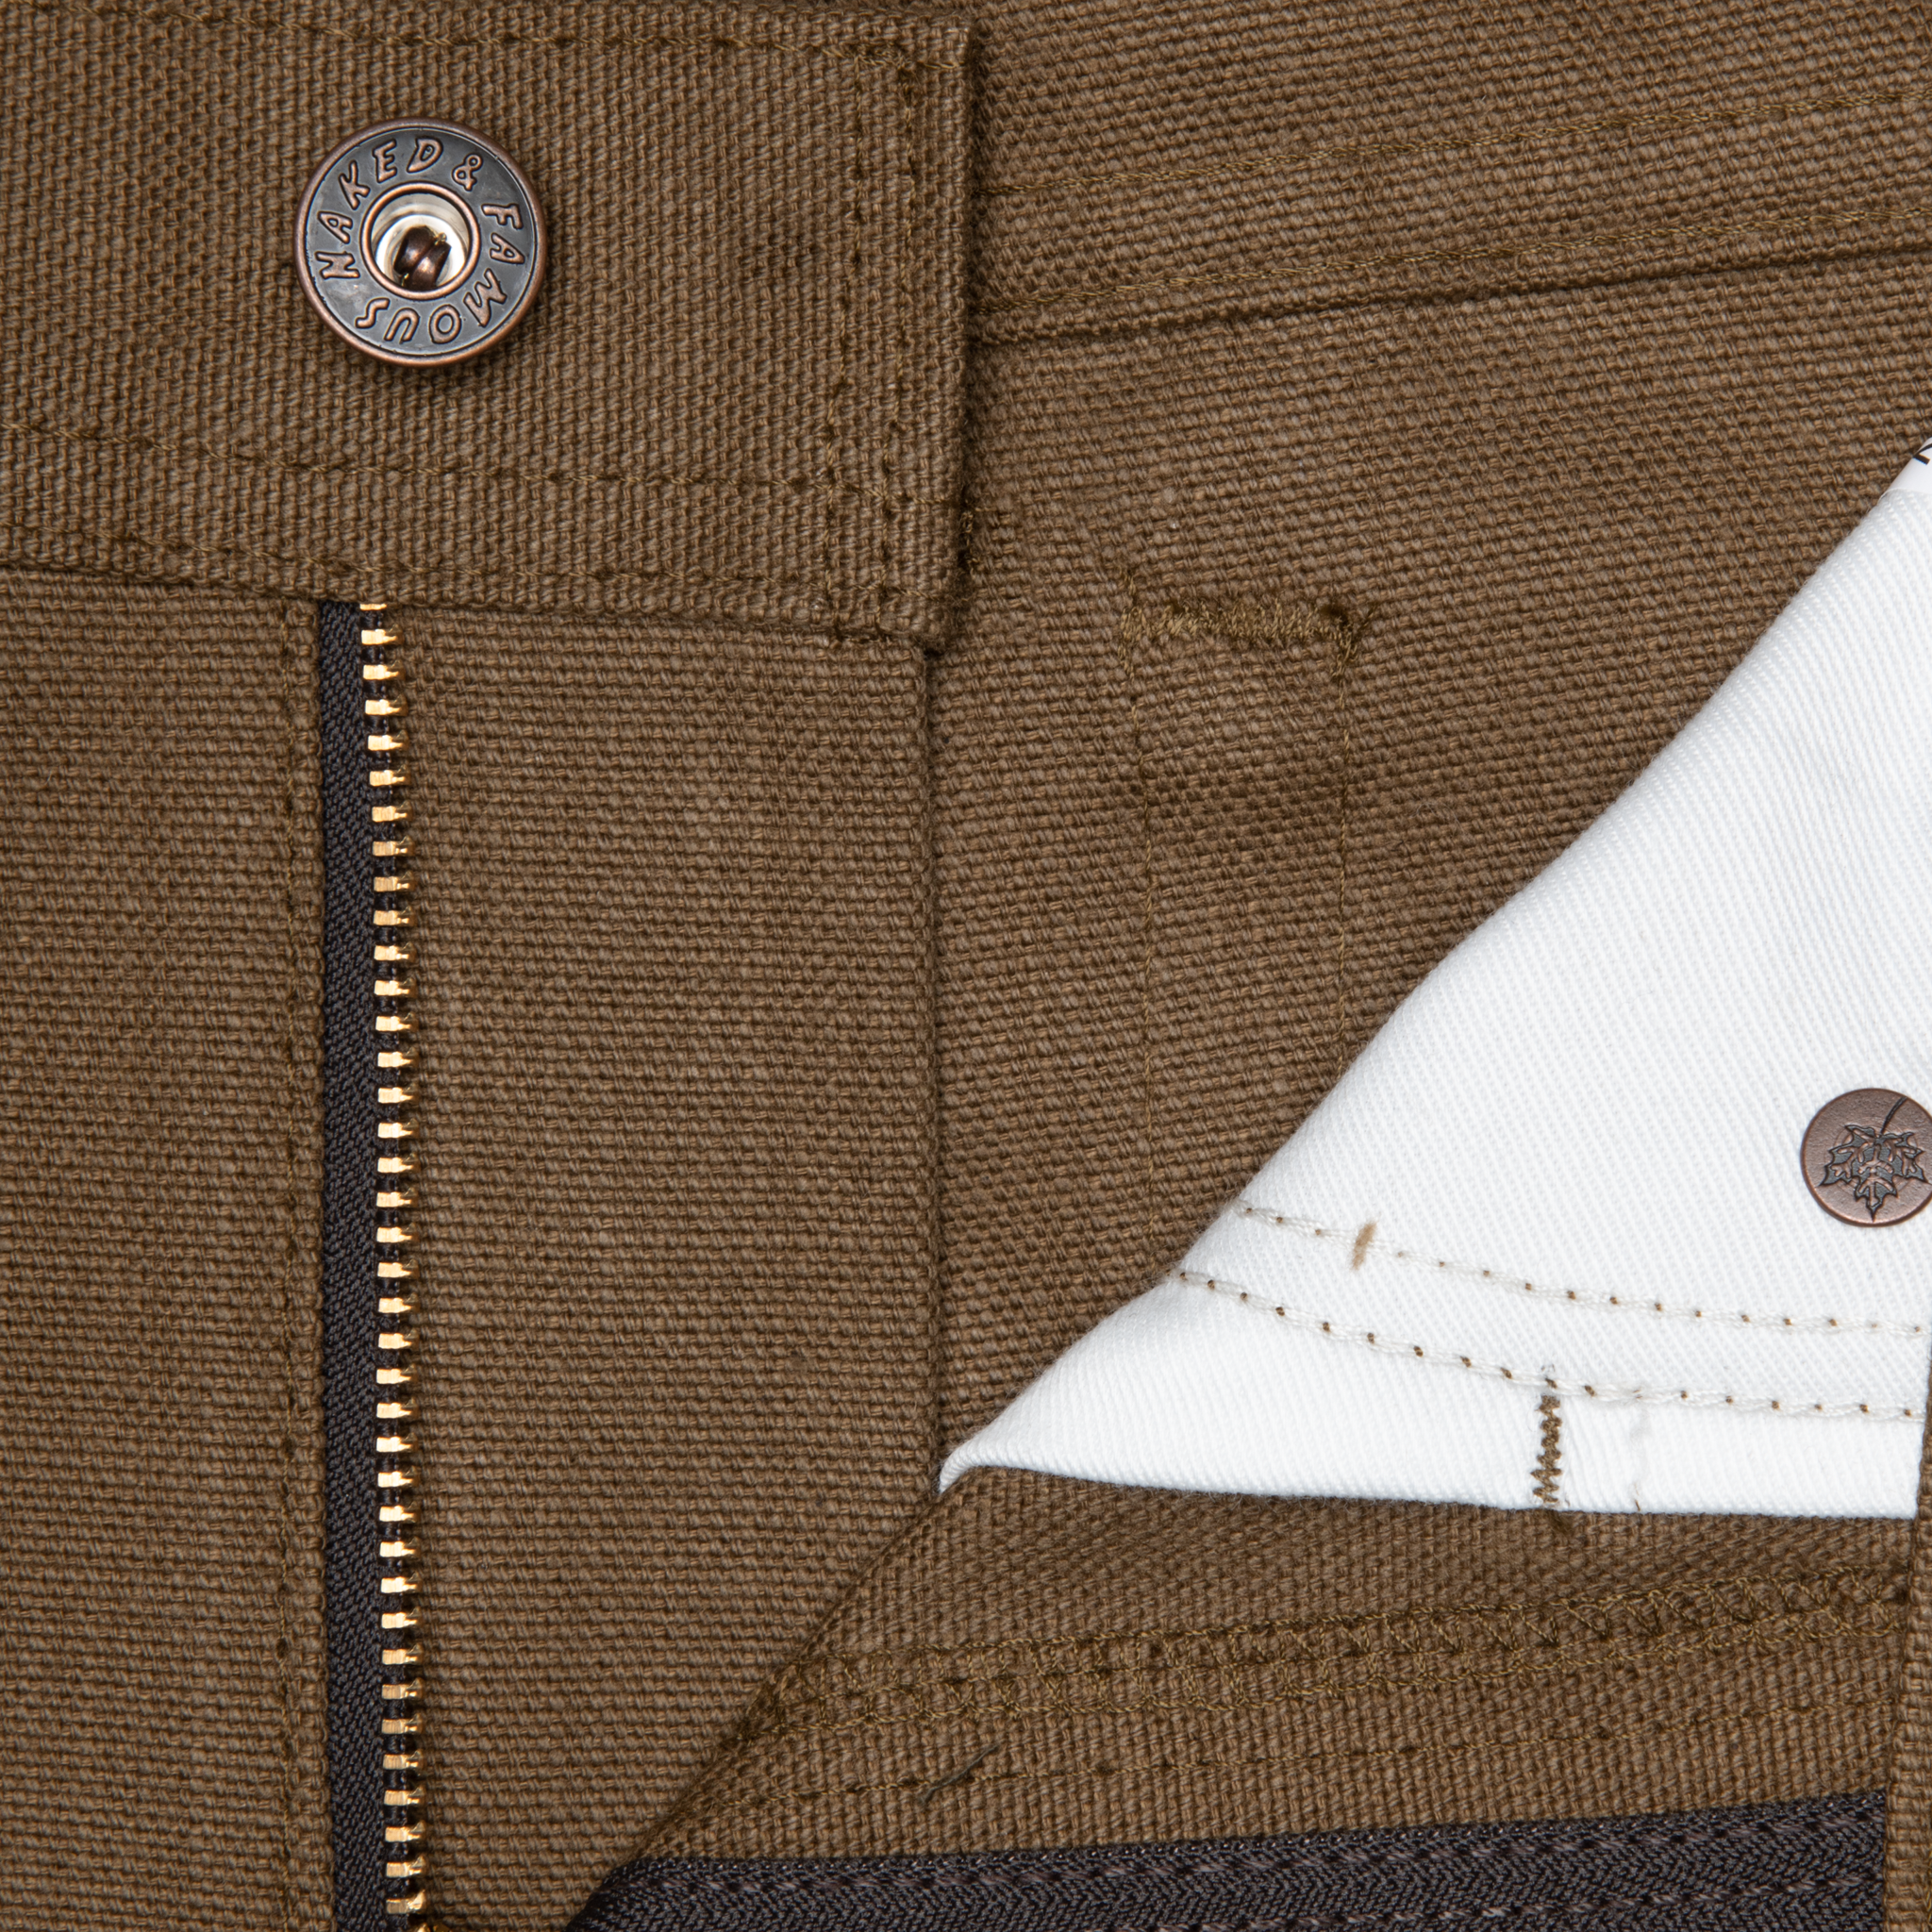  Raw Cotton Canvas - Brown - zip fly 